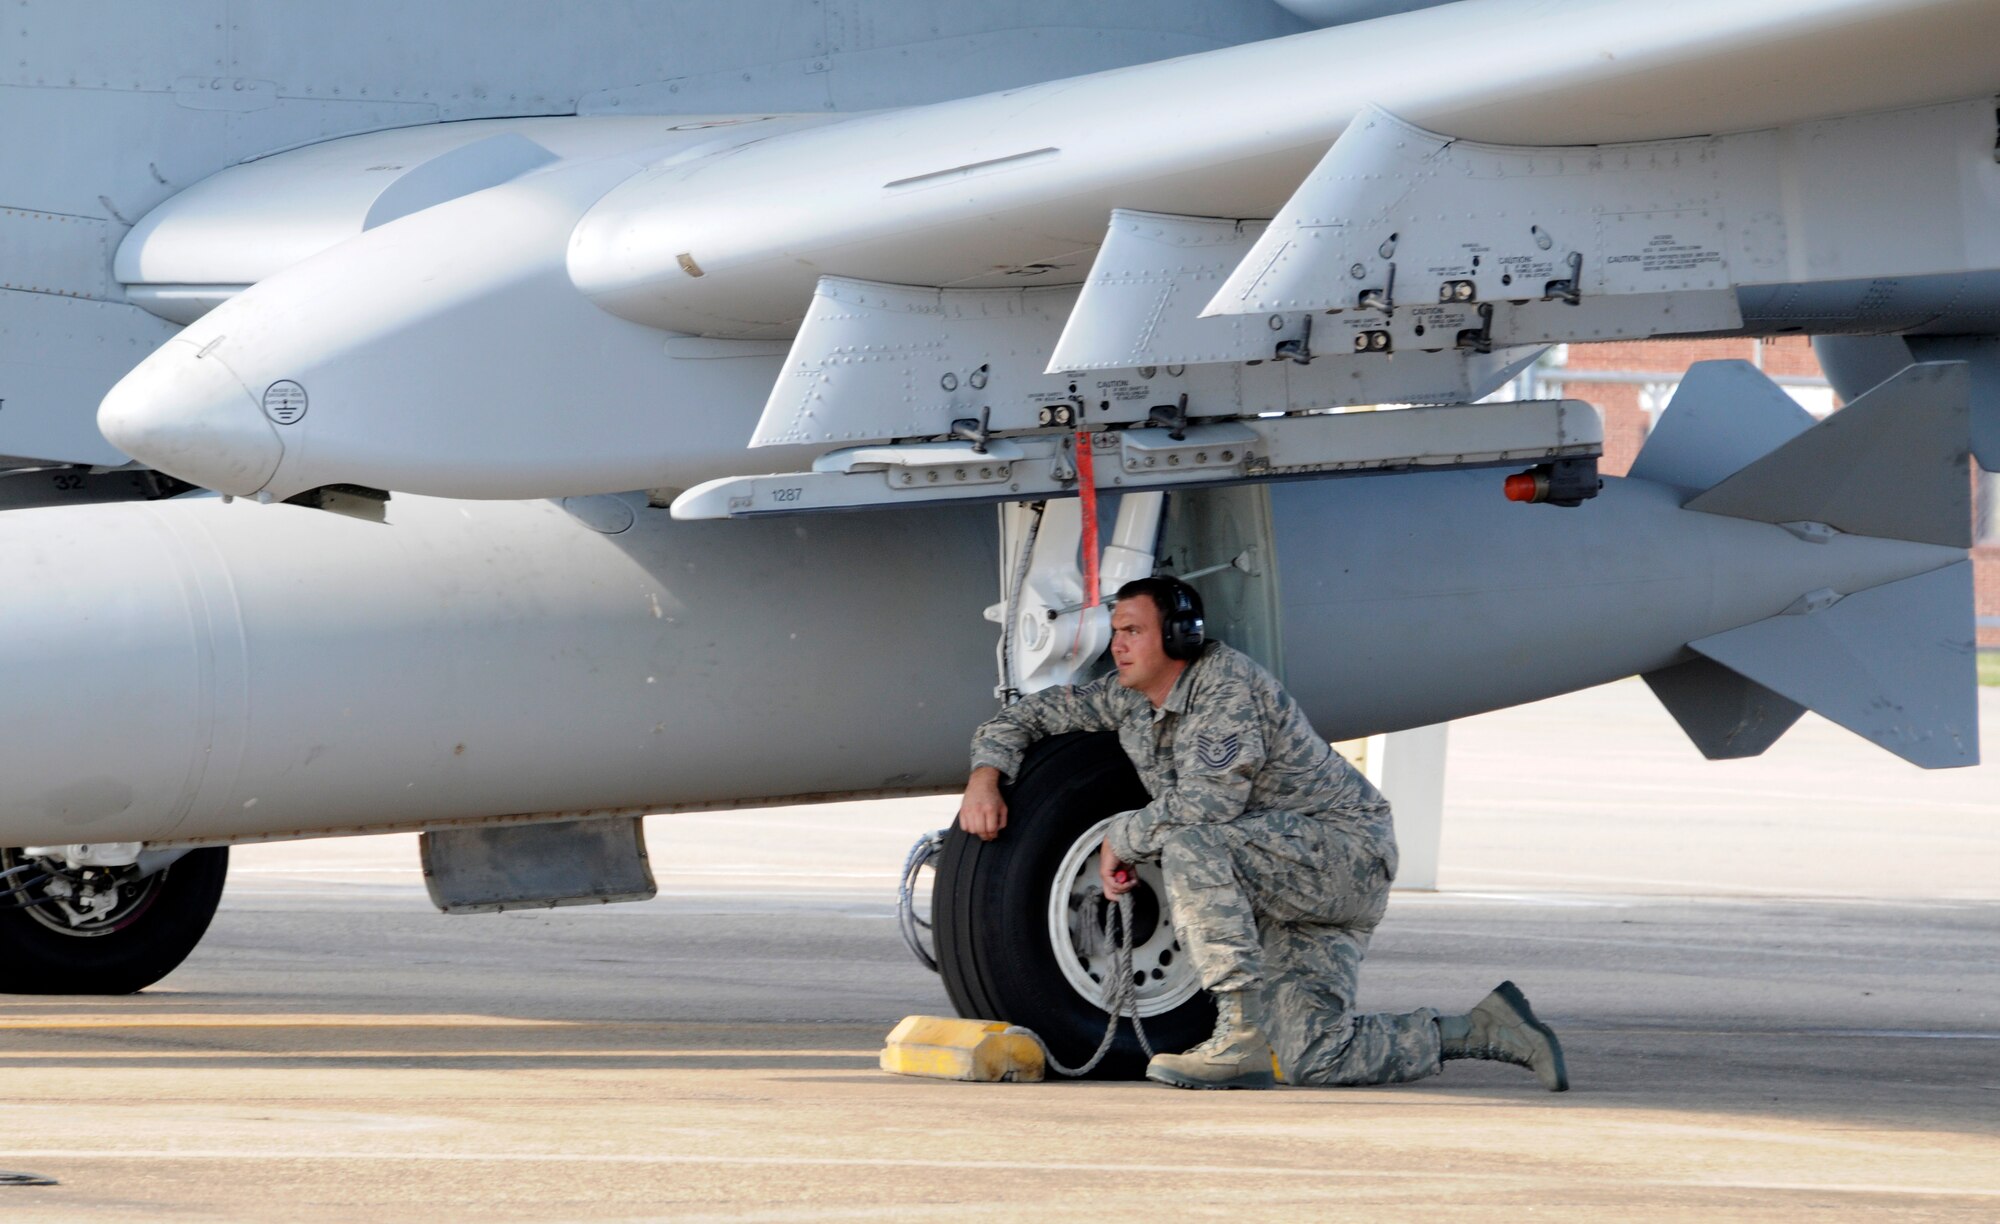 A crew chief with the 188th Aircraft Maintenance Squadron, prepares to remove chalks from an A-10C Thunderbolt II “Warthog,” Sept. 10 at Ebbing Air National Guard Base in Fort Smith, Ark. The pilot of the aircraft flew Tail No. A0614 back to Moody AFB, signaling the beginning of the end for the 188th’s fighter mission. The 188th will lose two Warthogs a month until the last two leave in June 2014. The 188th is in the beginning stages of converting from A-10s to an Intelligence and remotely piloted aircraft mission. The mission, which will feature the MQ-9 Reaper, will also boast the Air National Guard’s only space-focused targeting squadron. (U.S. Air National Guard photo by Senior Airman Hannah Landeros/188th Fighter Wing Public Affairs)